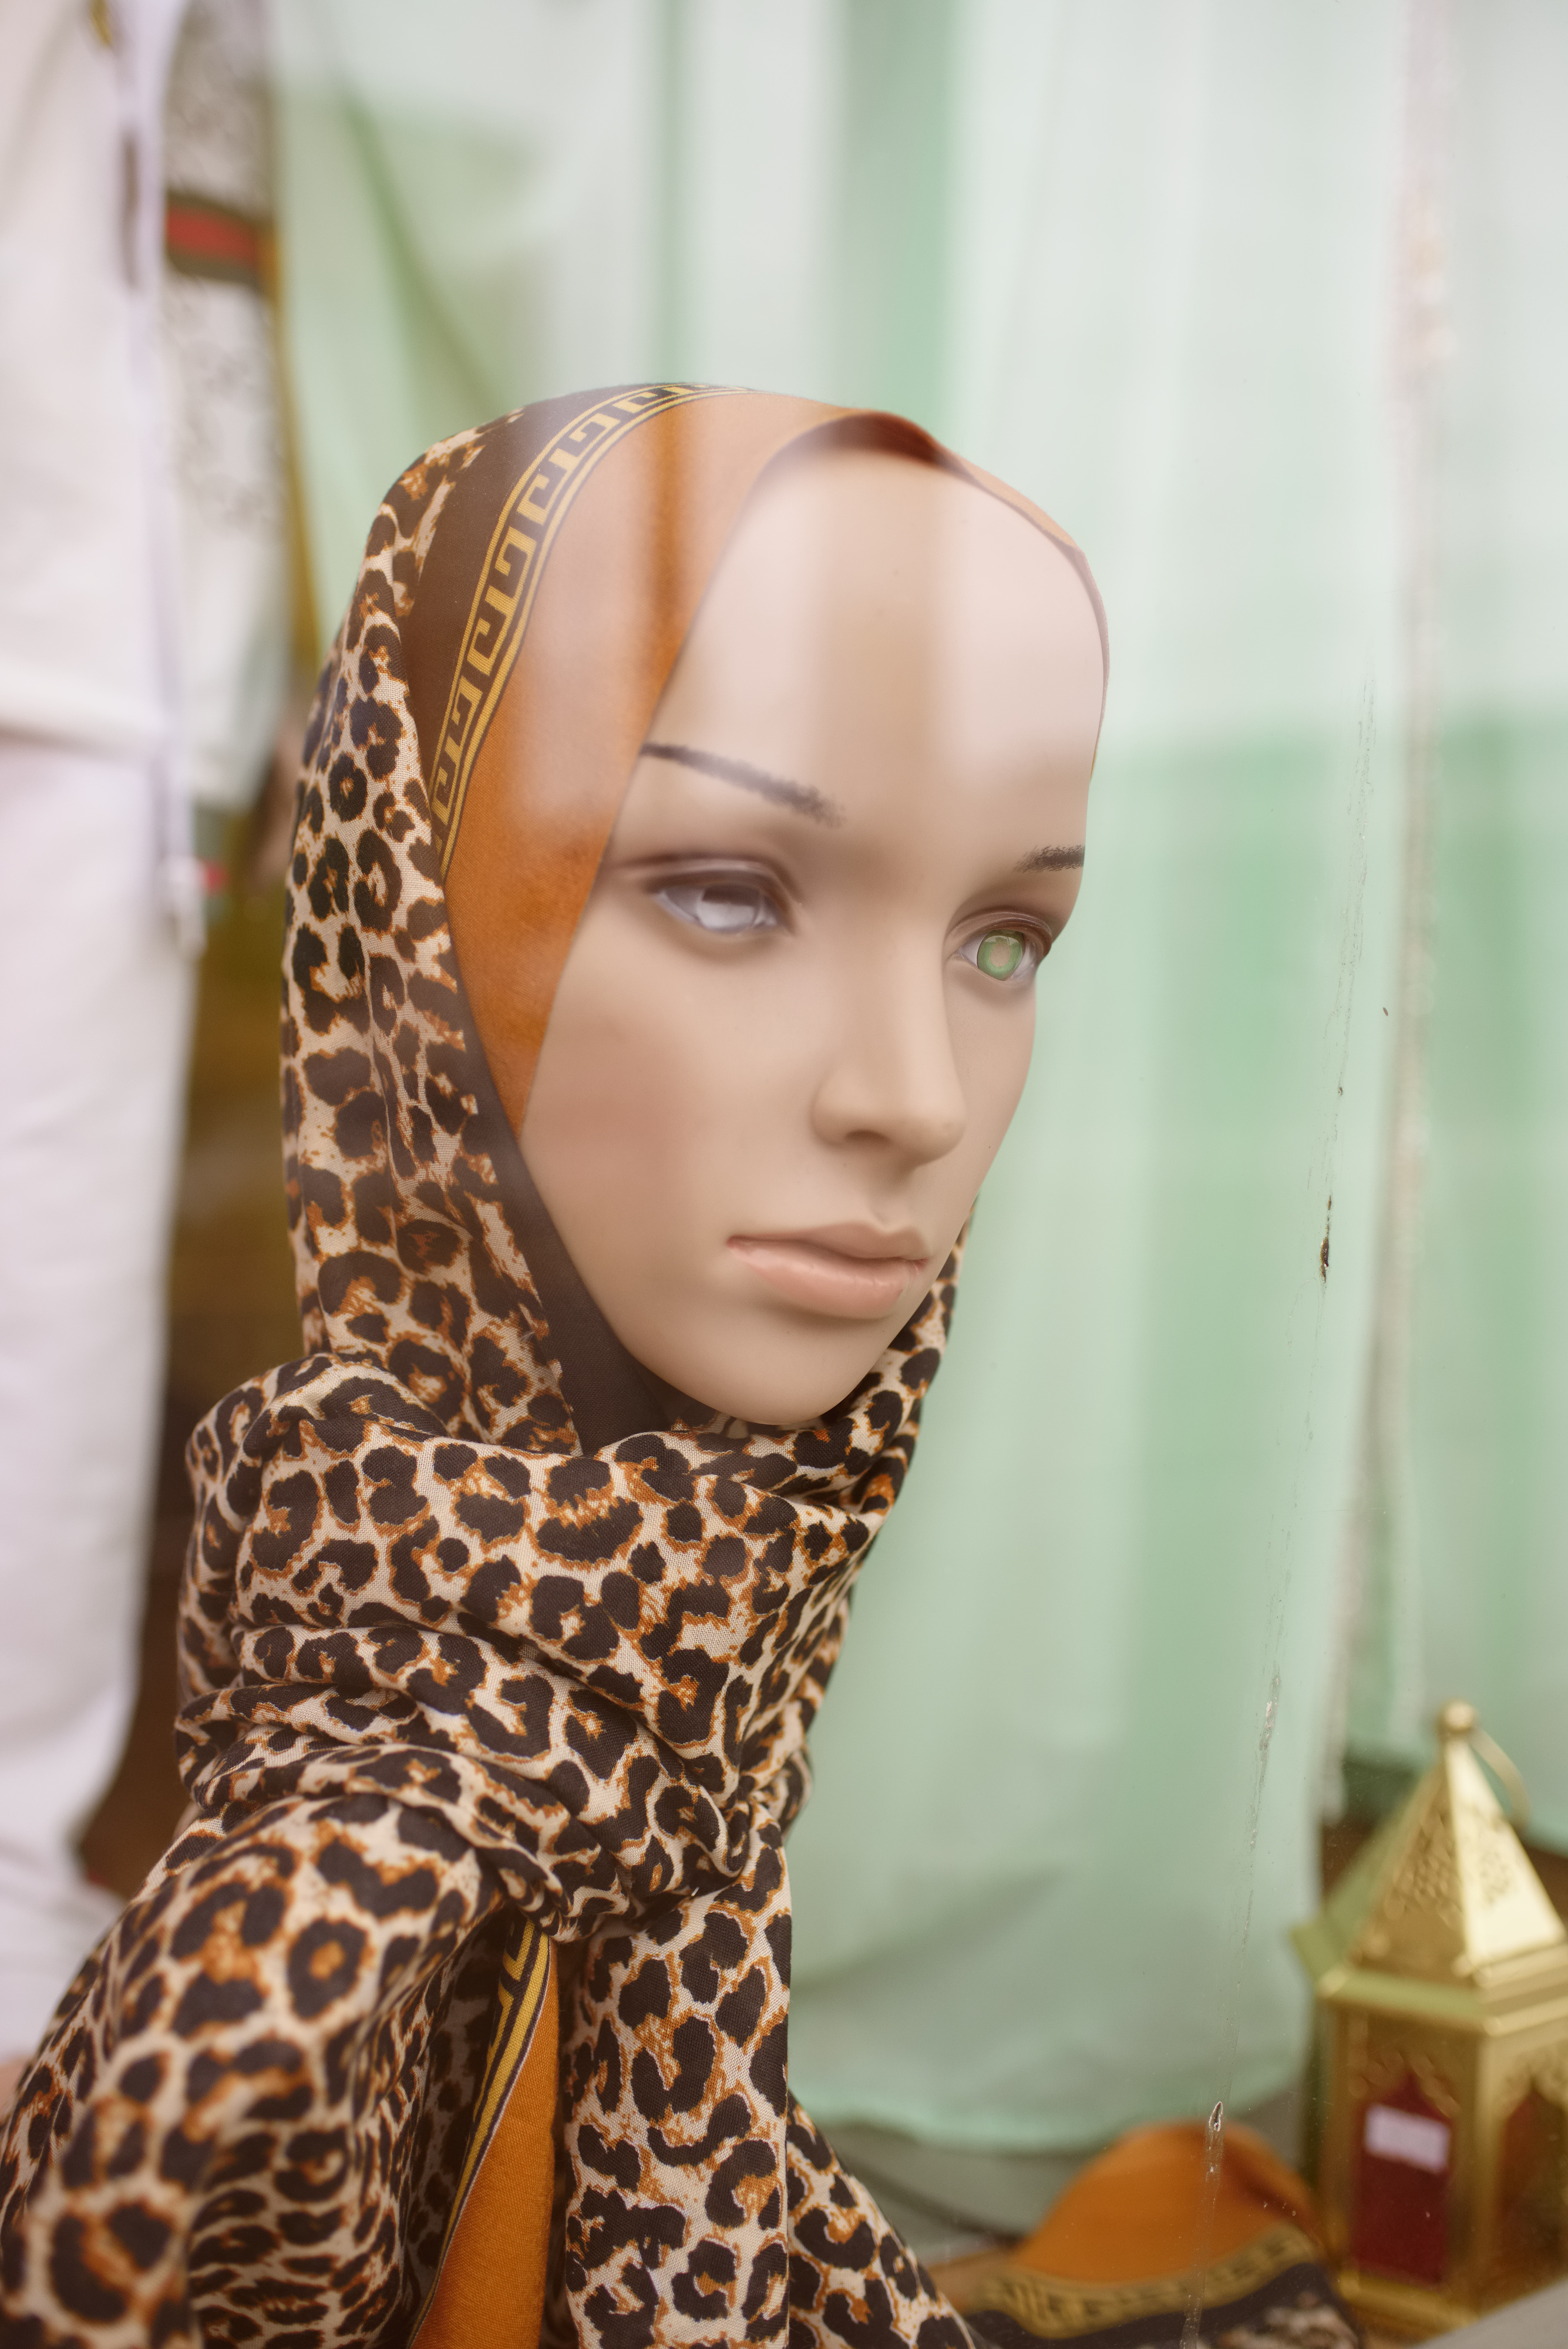 Mannequin wearing a leopard hijab